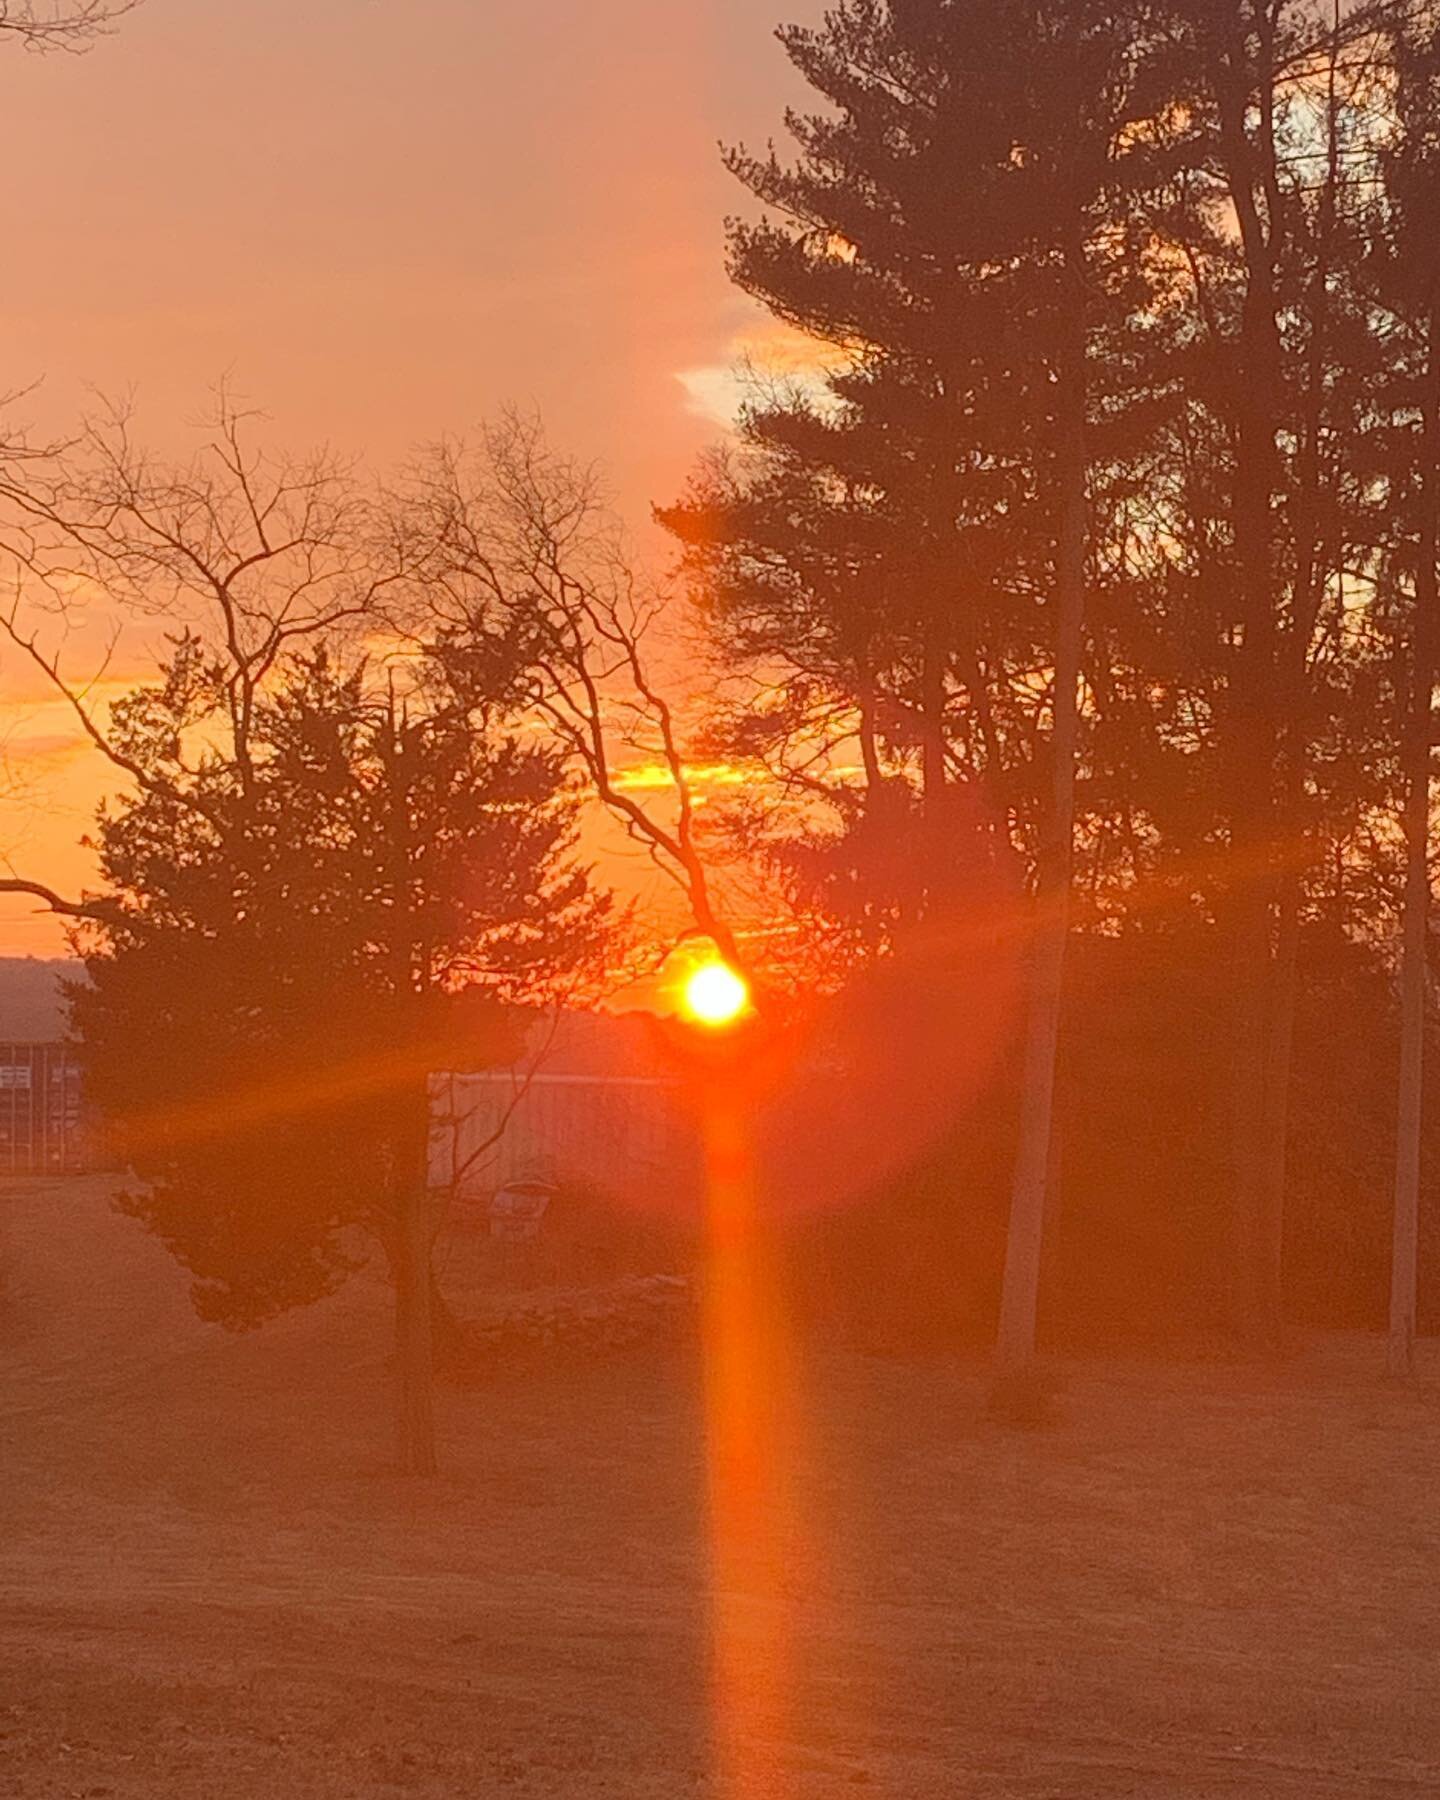 Breathe into your sovereignty. Feel the freedom of choice vibrating in every cell of your body. Know yourself fully. Release limitations. Create freely.

What you bear witness to, multiplies in your life. 

#nofilter #sunset #spirit #energy #resonanc